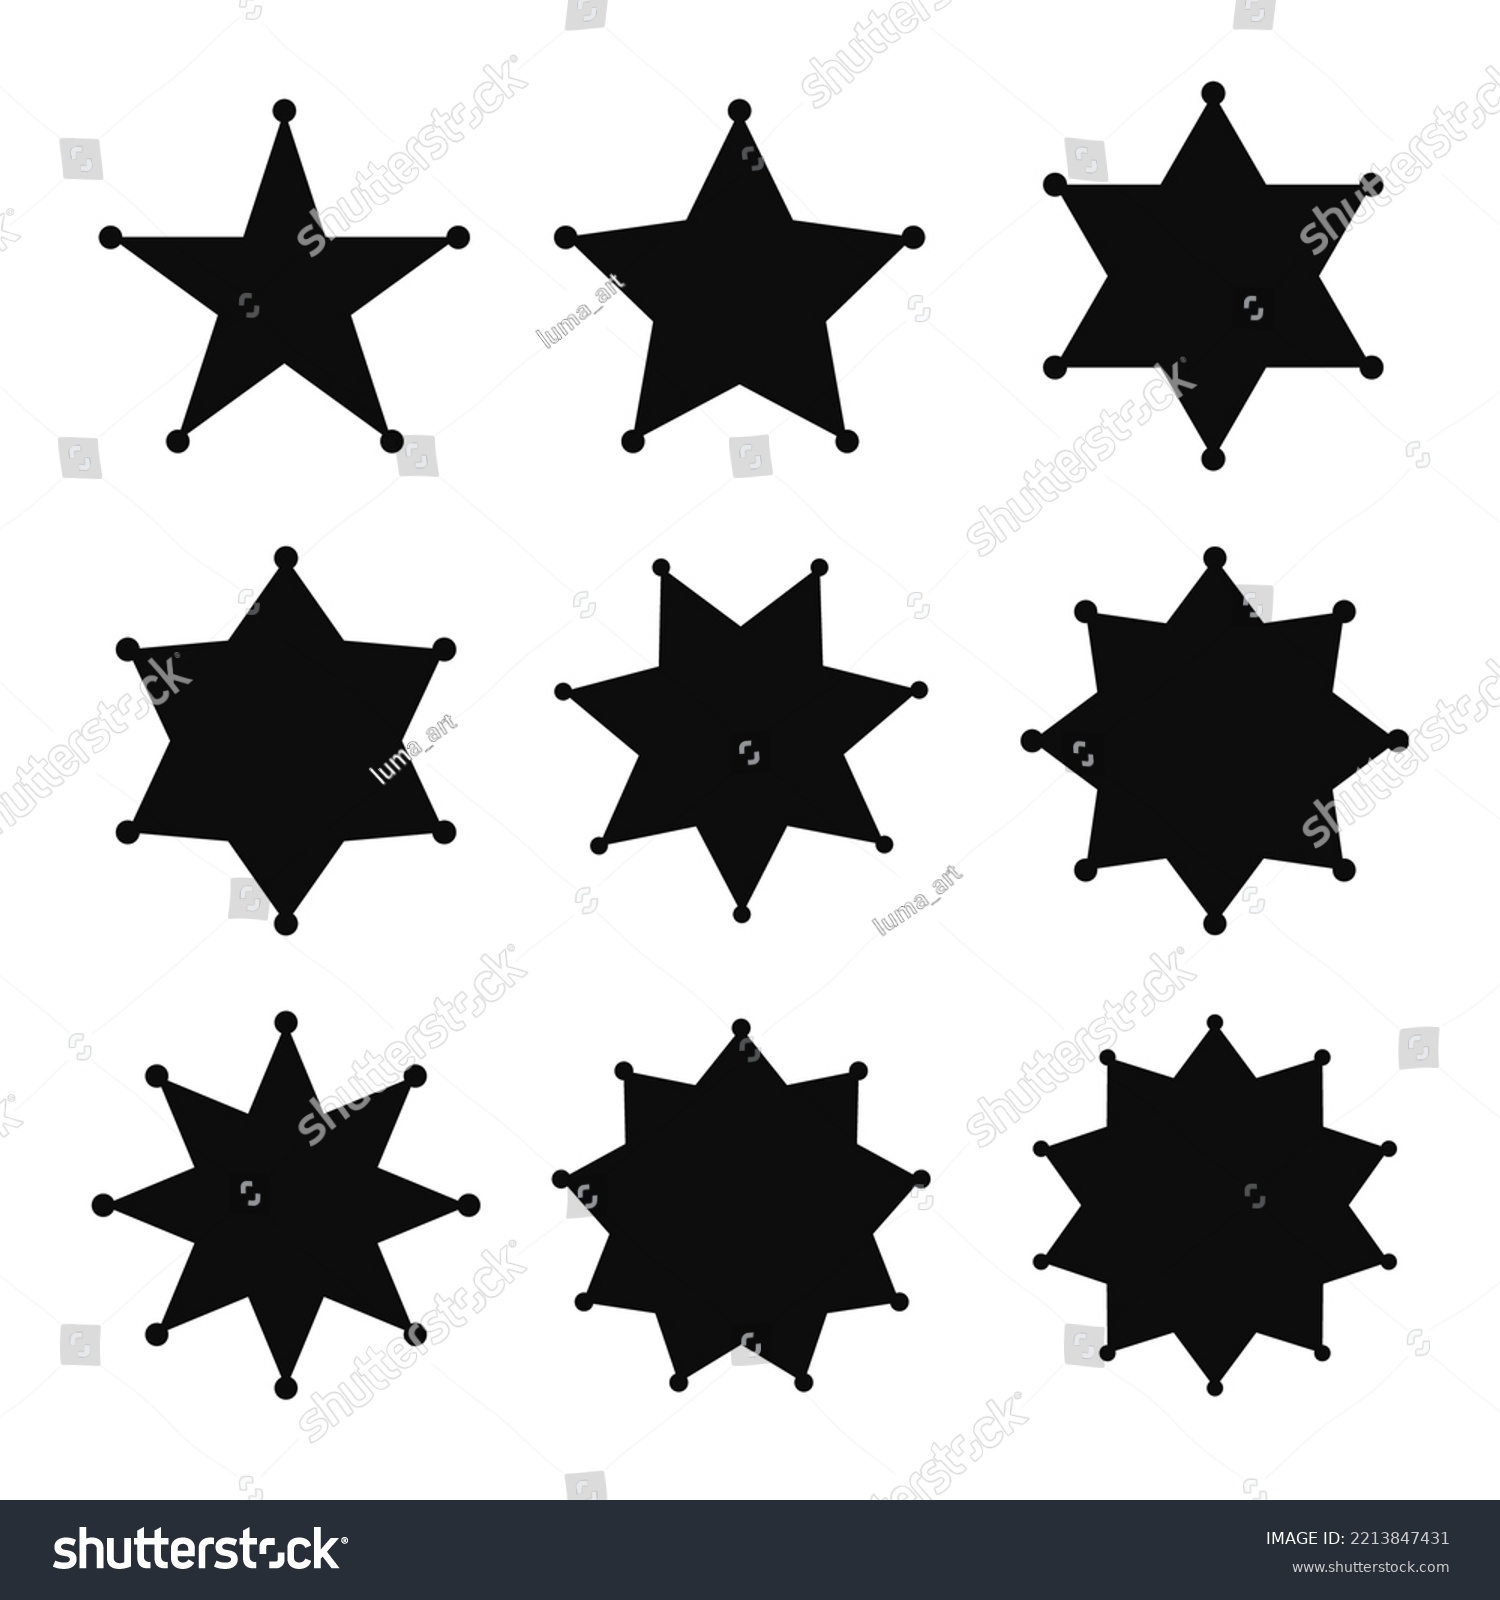 SVG of Vector set of sheriff's stars black badges. From five point to ten point stars icon collection svg